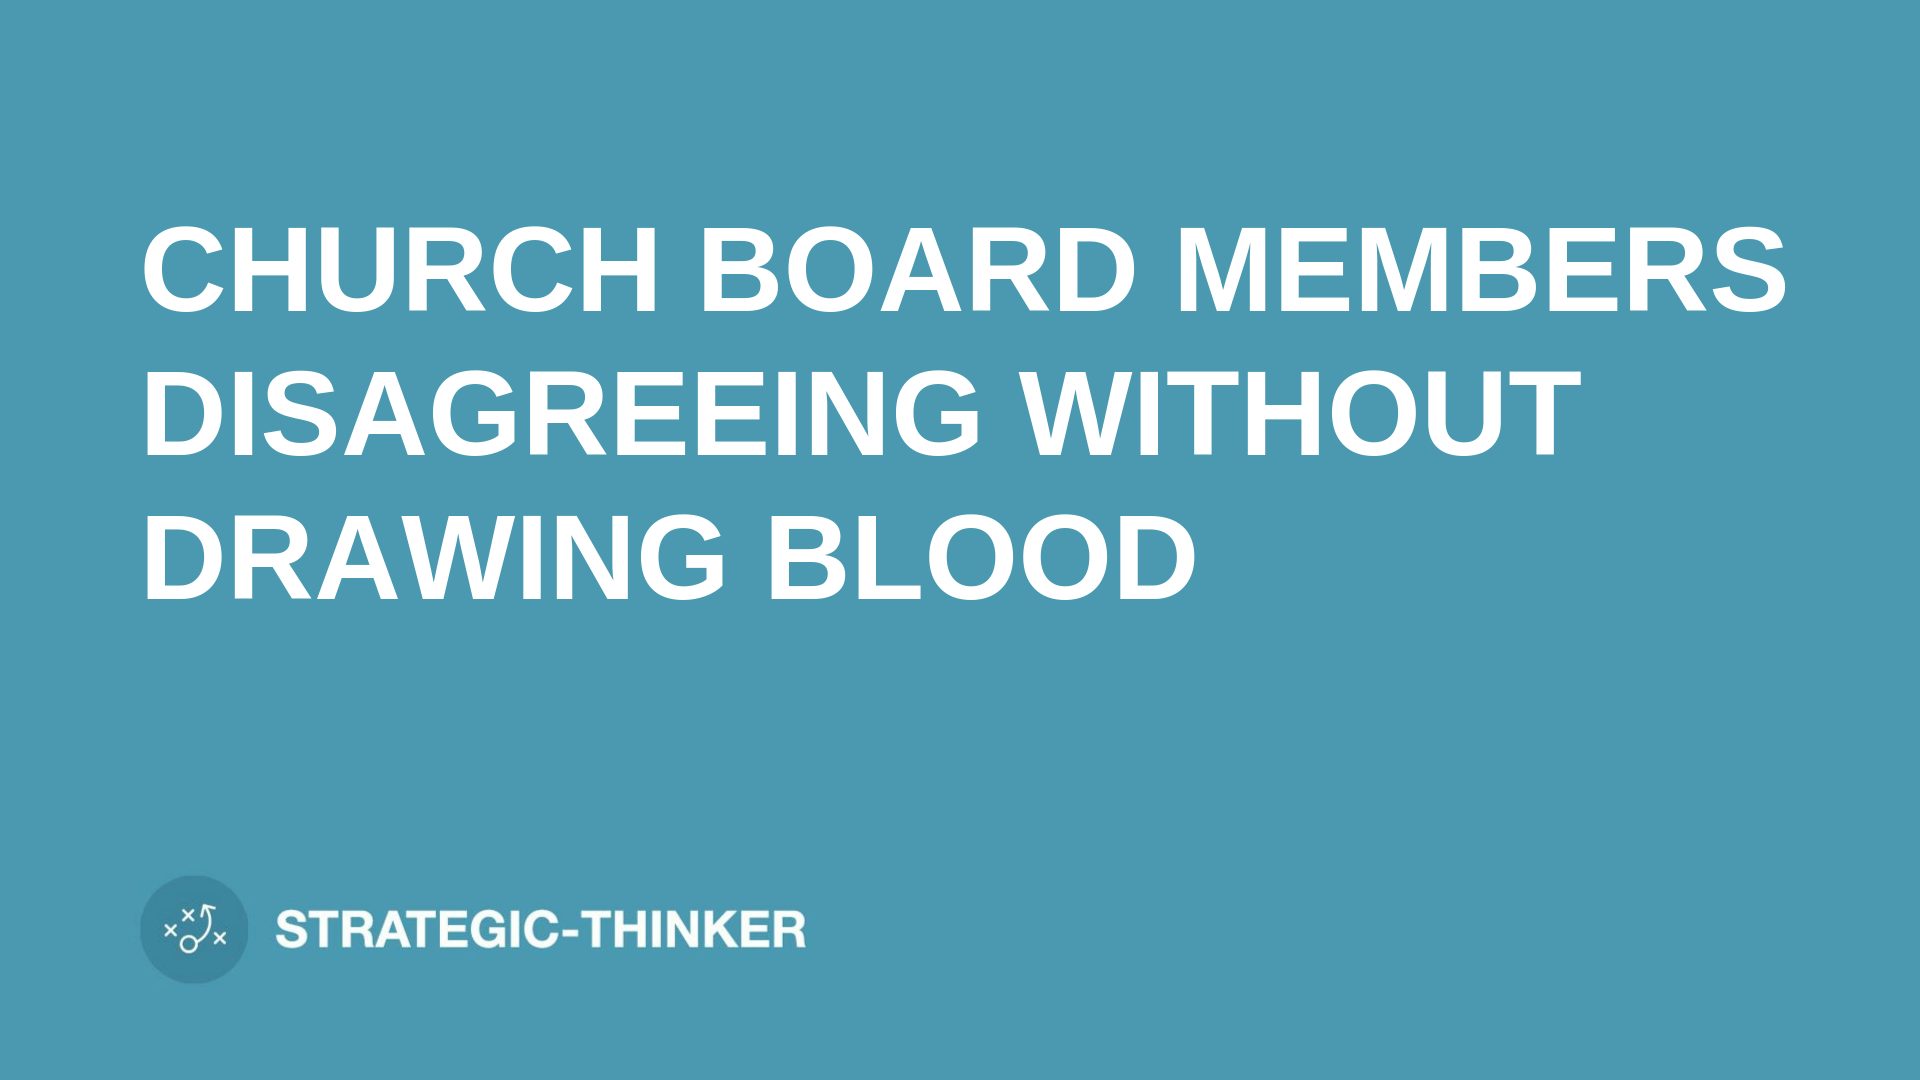 text "CHURCH BOARD MEMBERS DISAGREEING" on blue background leaders.church